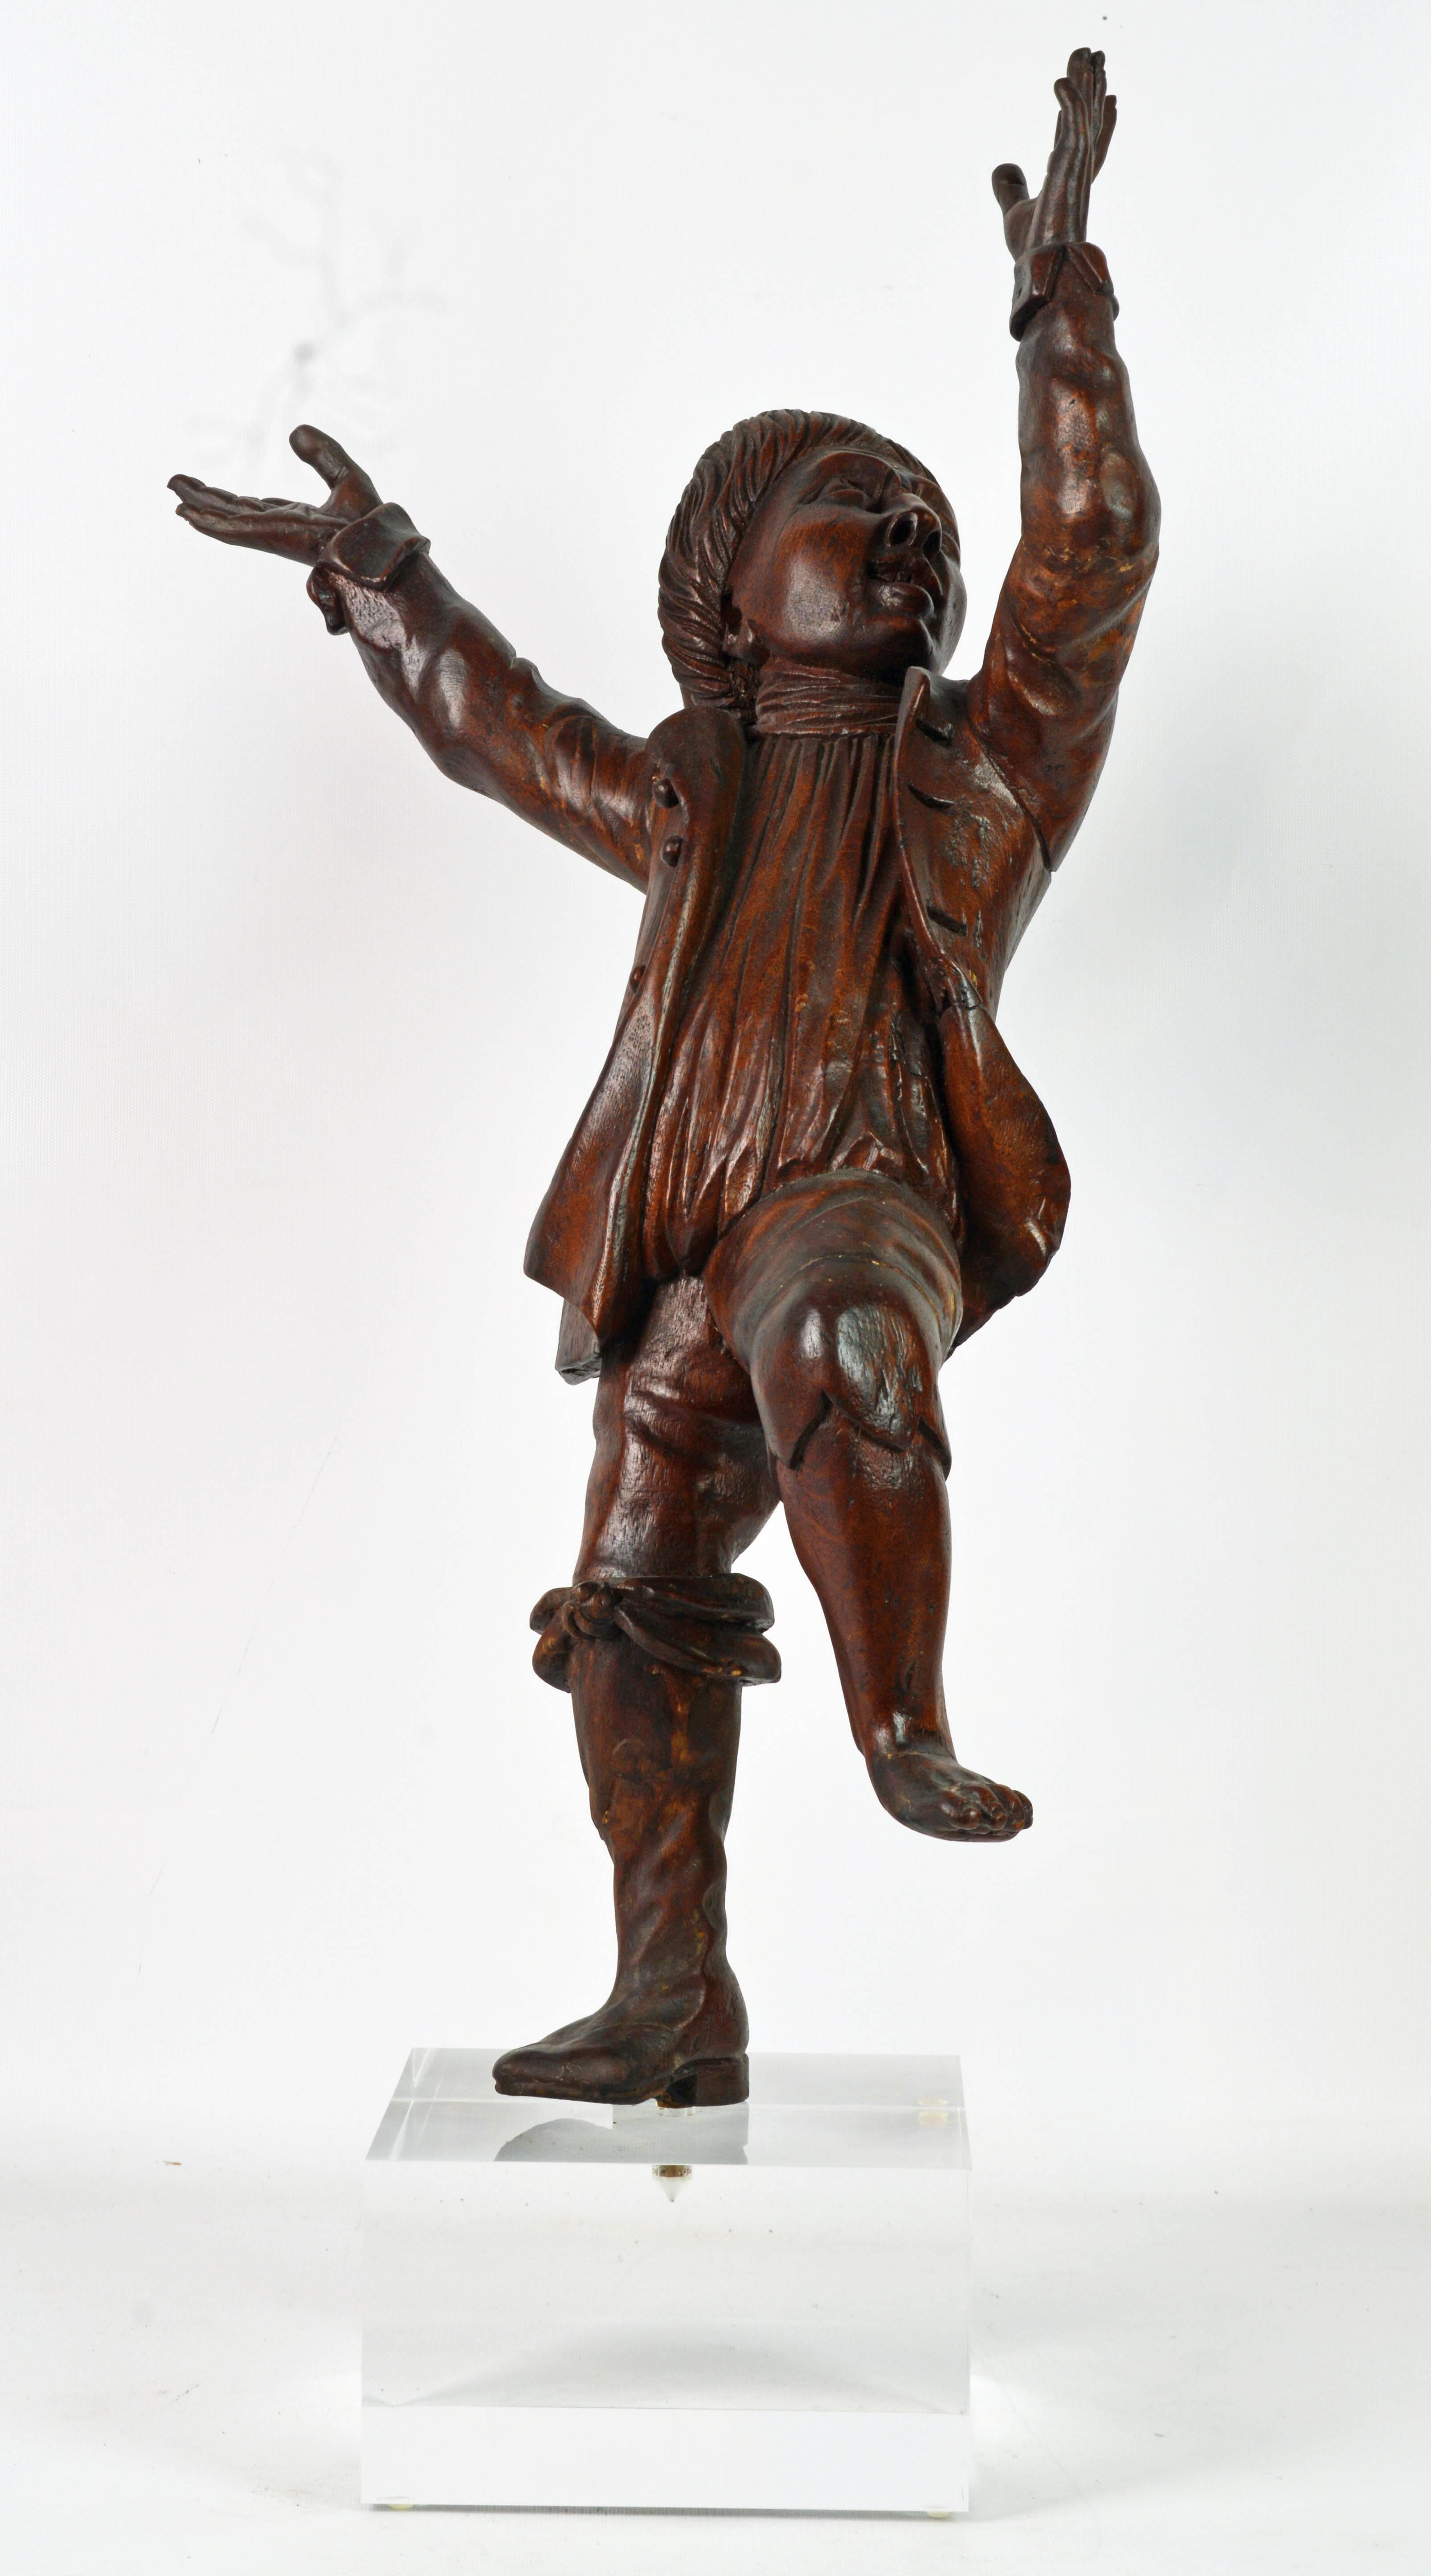 Standing more than 30 inches tall including the modern Lucite base this Italian figure features great movement of form and a sense of jubilant joy. The boy is wearing the traditional French hat, a well detailed frock, linen shirt and an adorned boot